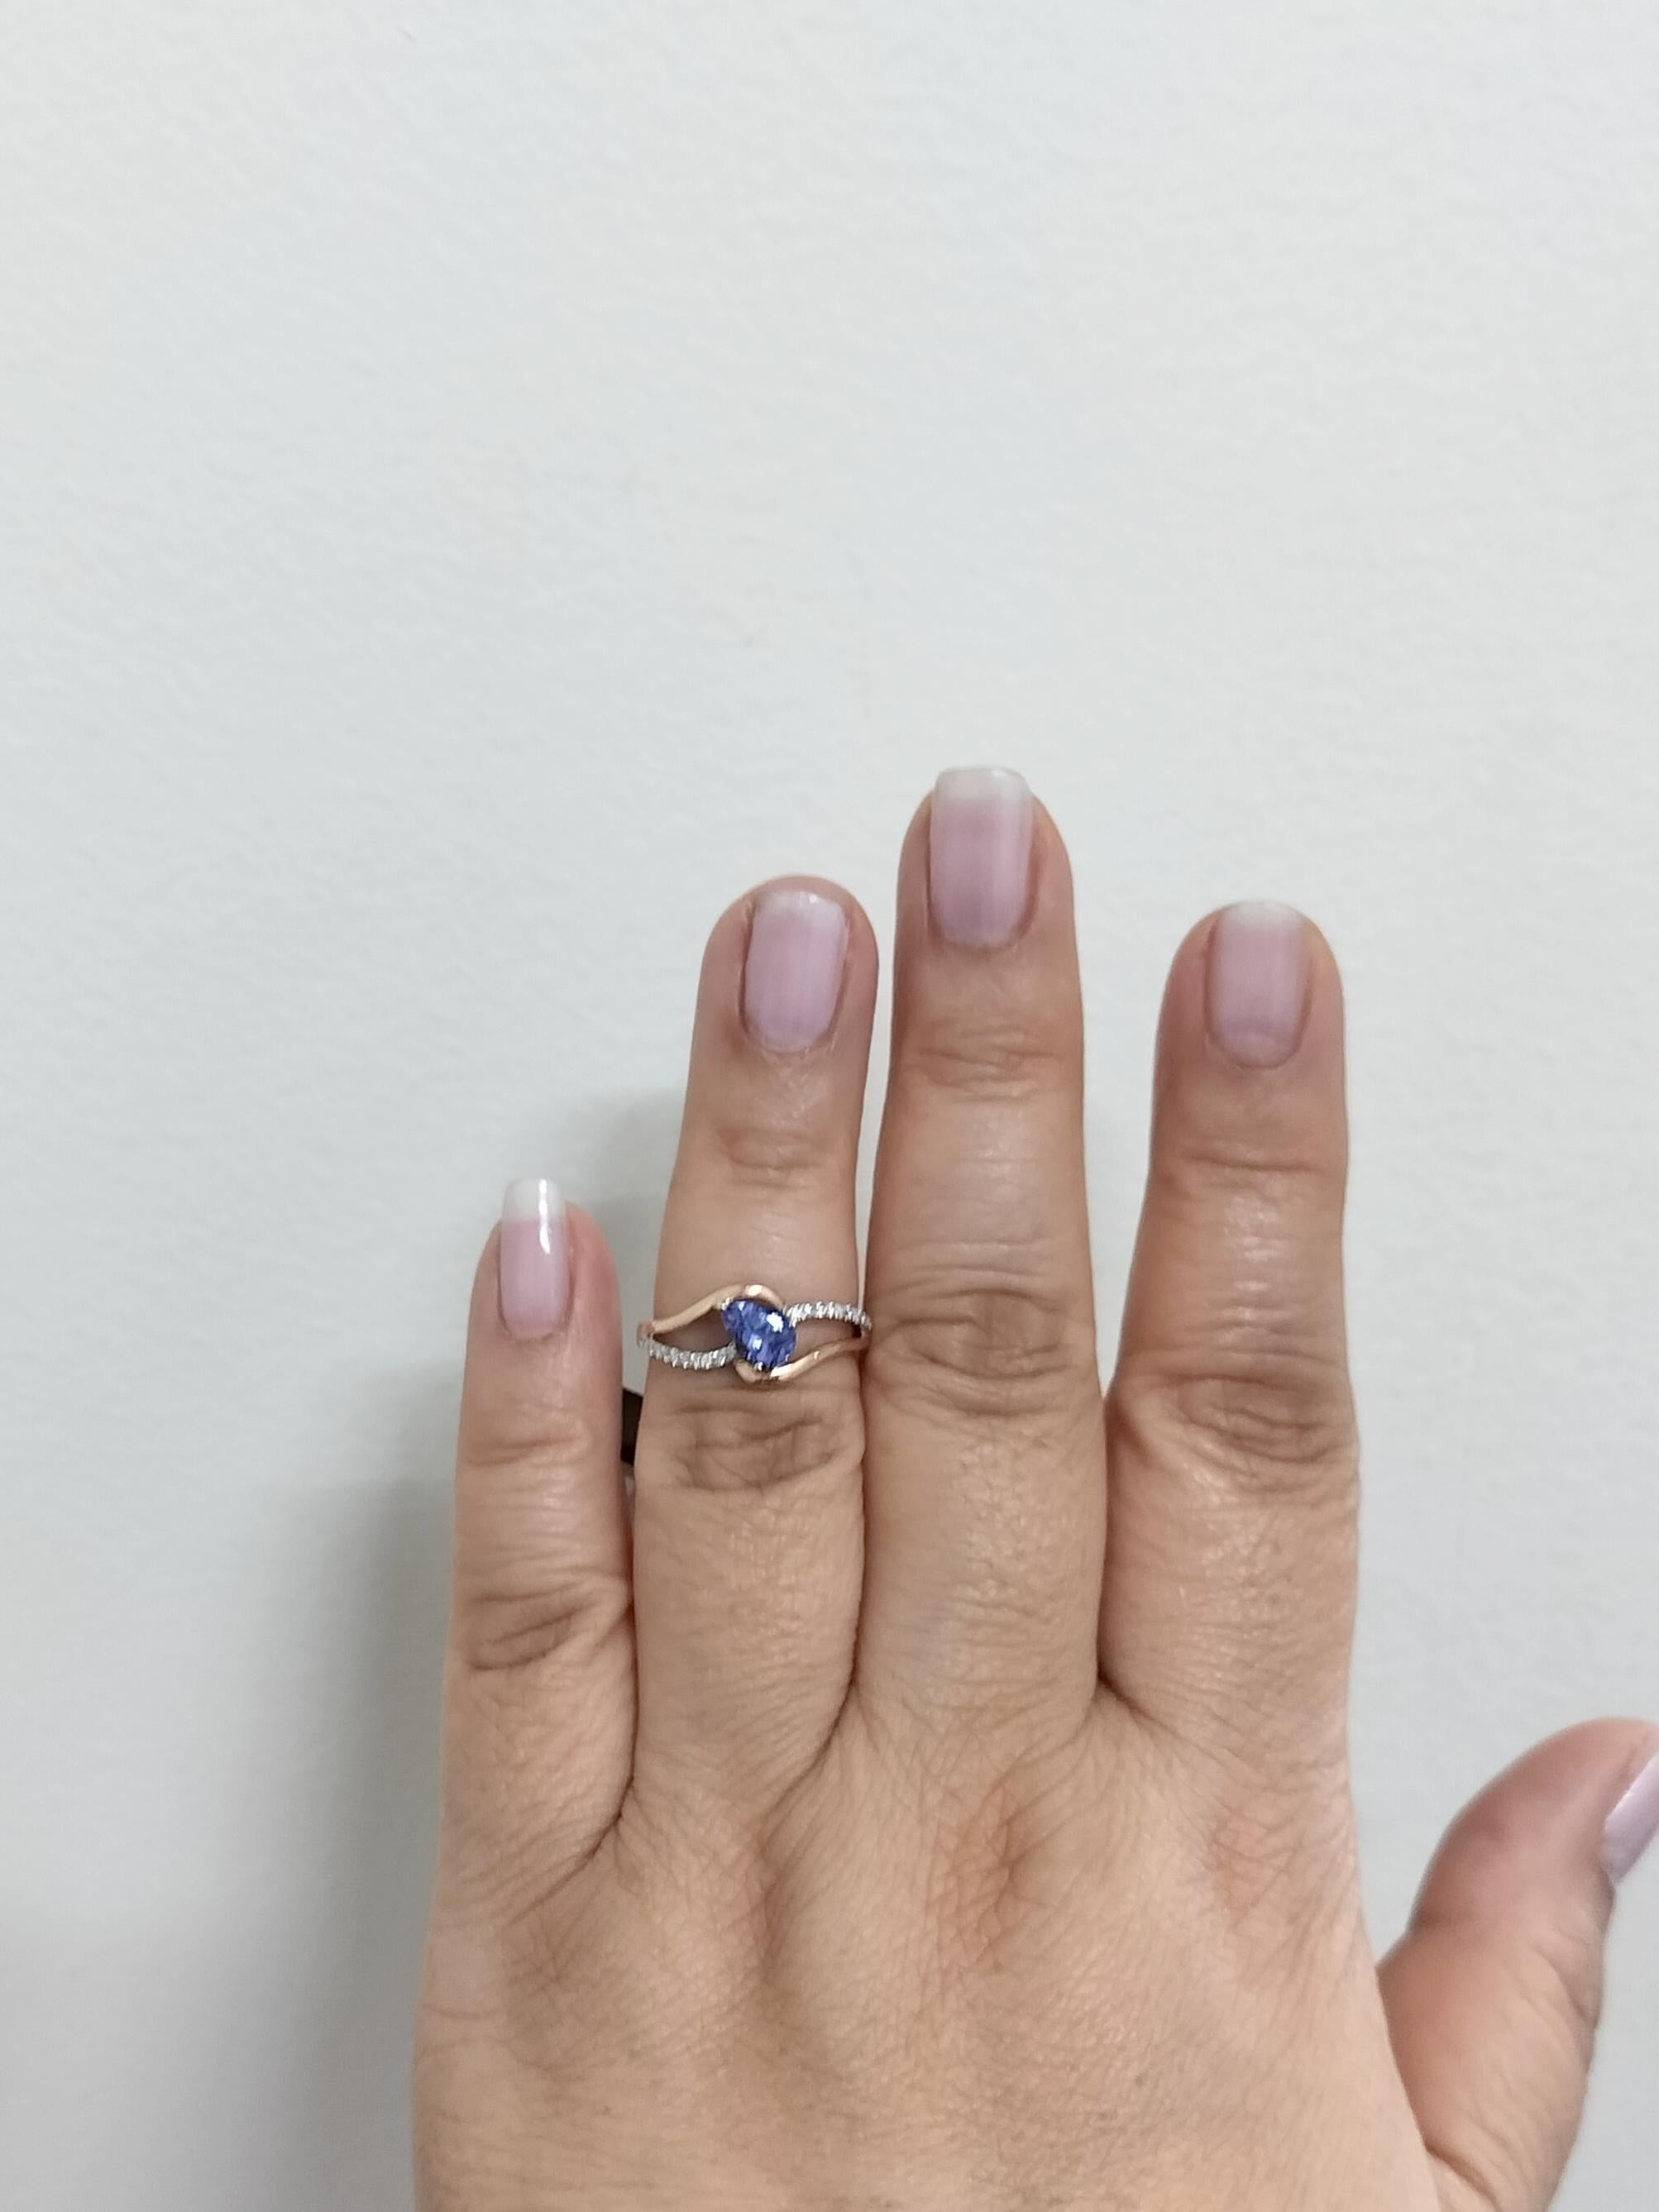 Beautiful 0.60 ct. tanzanite pear shape with 0.12 ct. white diamond rounds.  Handmade in 14k rose gold and white gold.  Ring size 6.5.